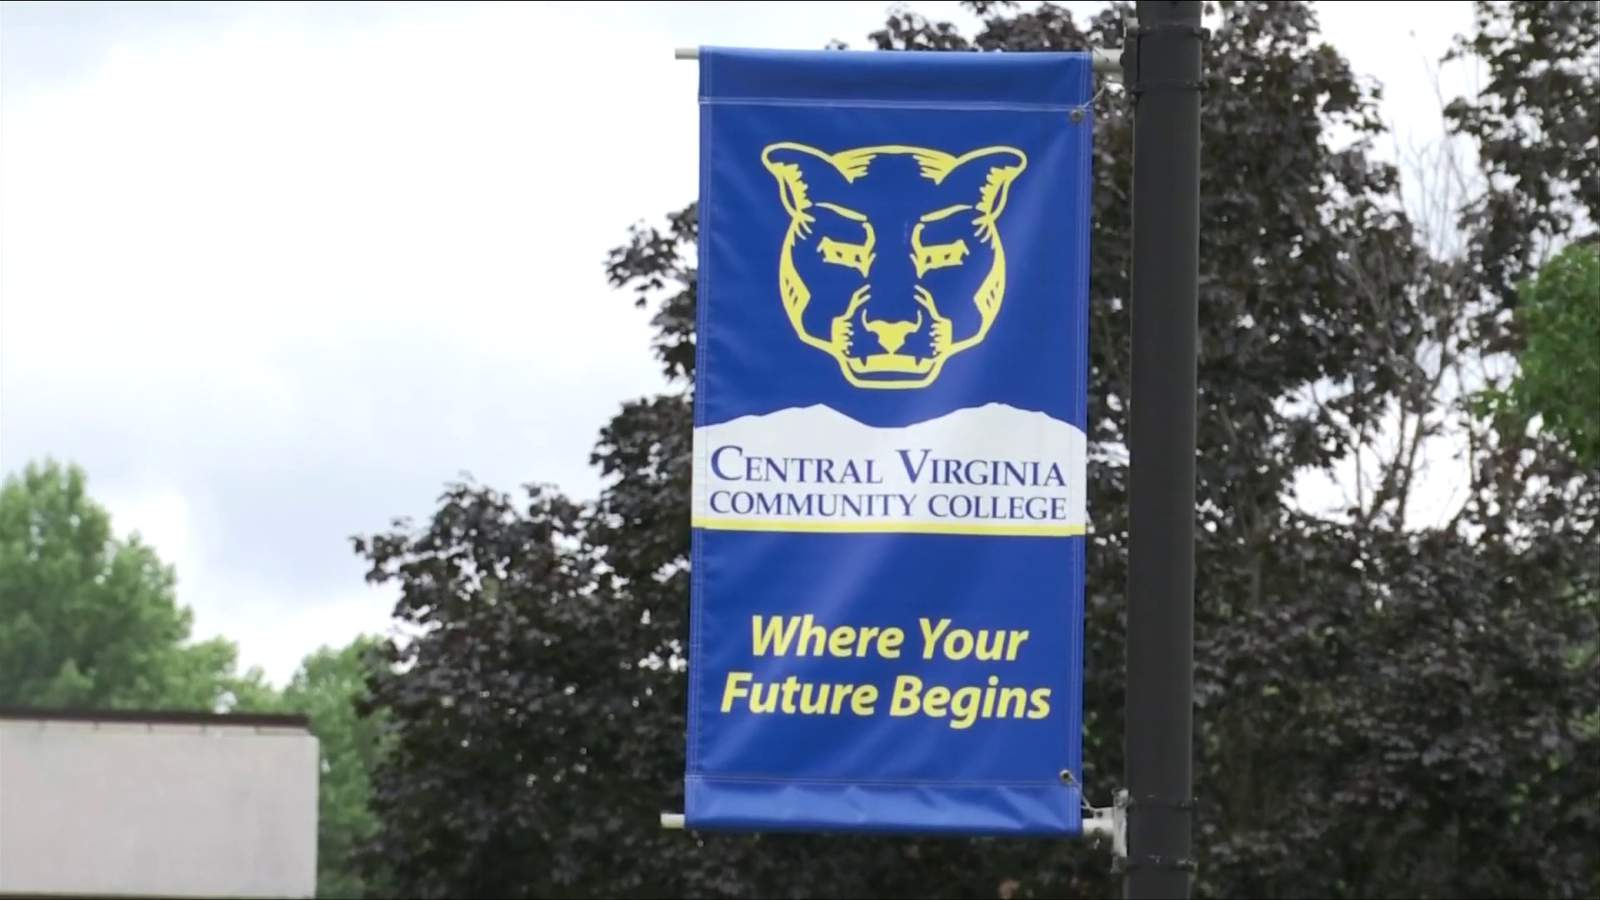 Central Virginia Community College lending laptops to students in need